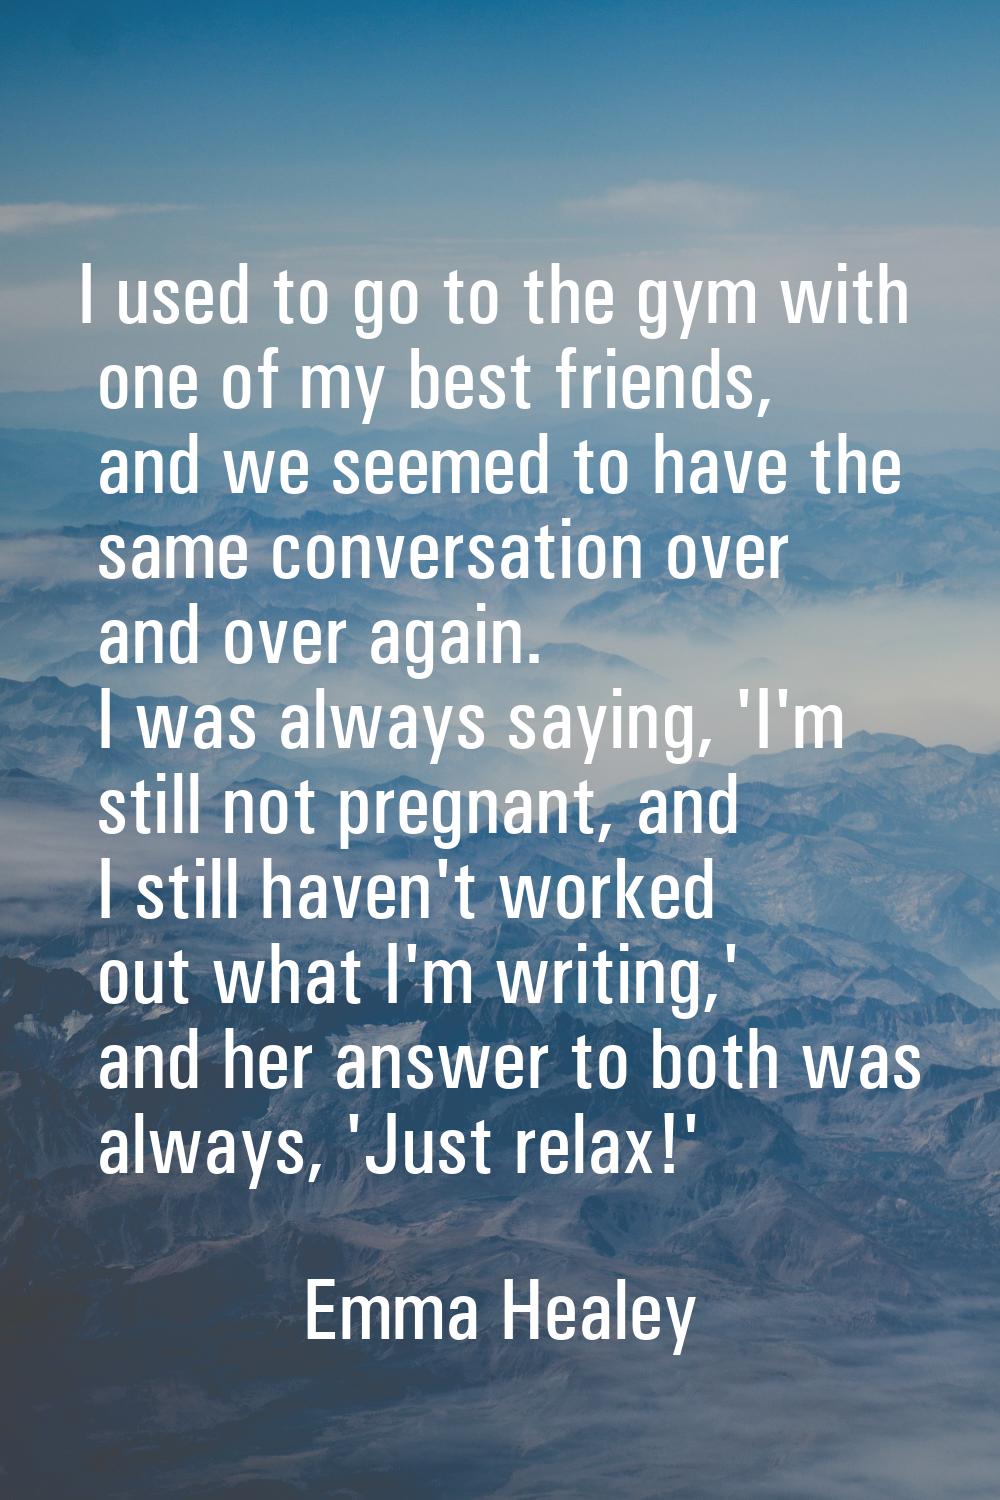 I used to go to the gym with one of my best friends, and we seemed to have the same conversation ov